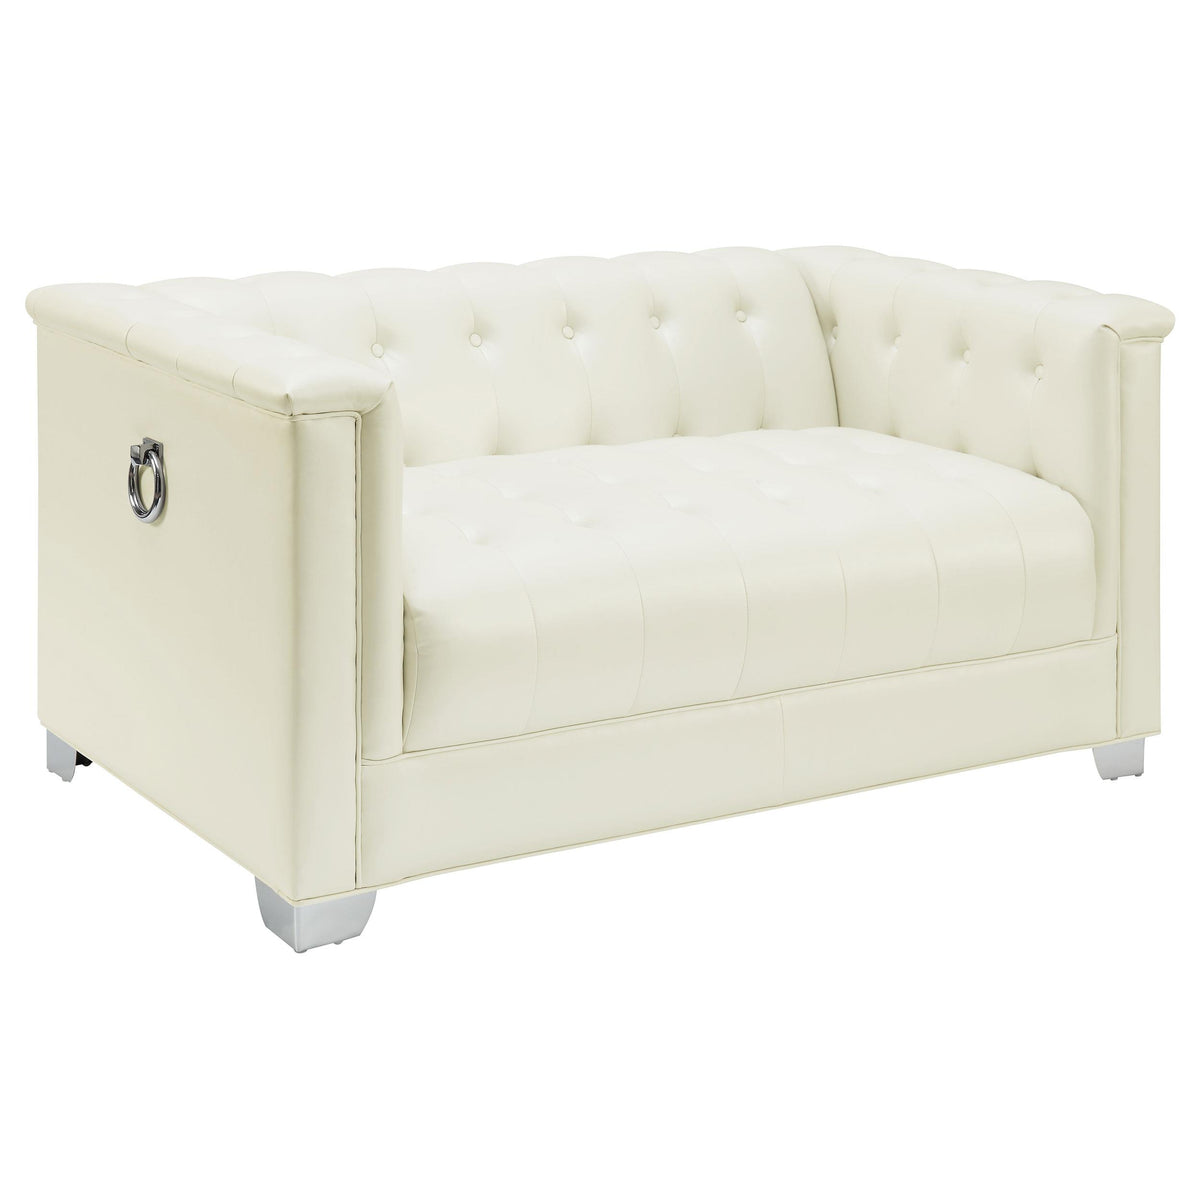 Chaviano Tufted Upholstered Loveseat Pearl White  Half Price Furniture